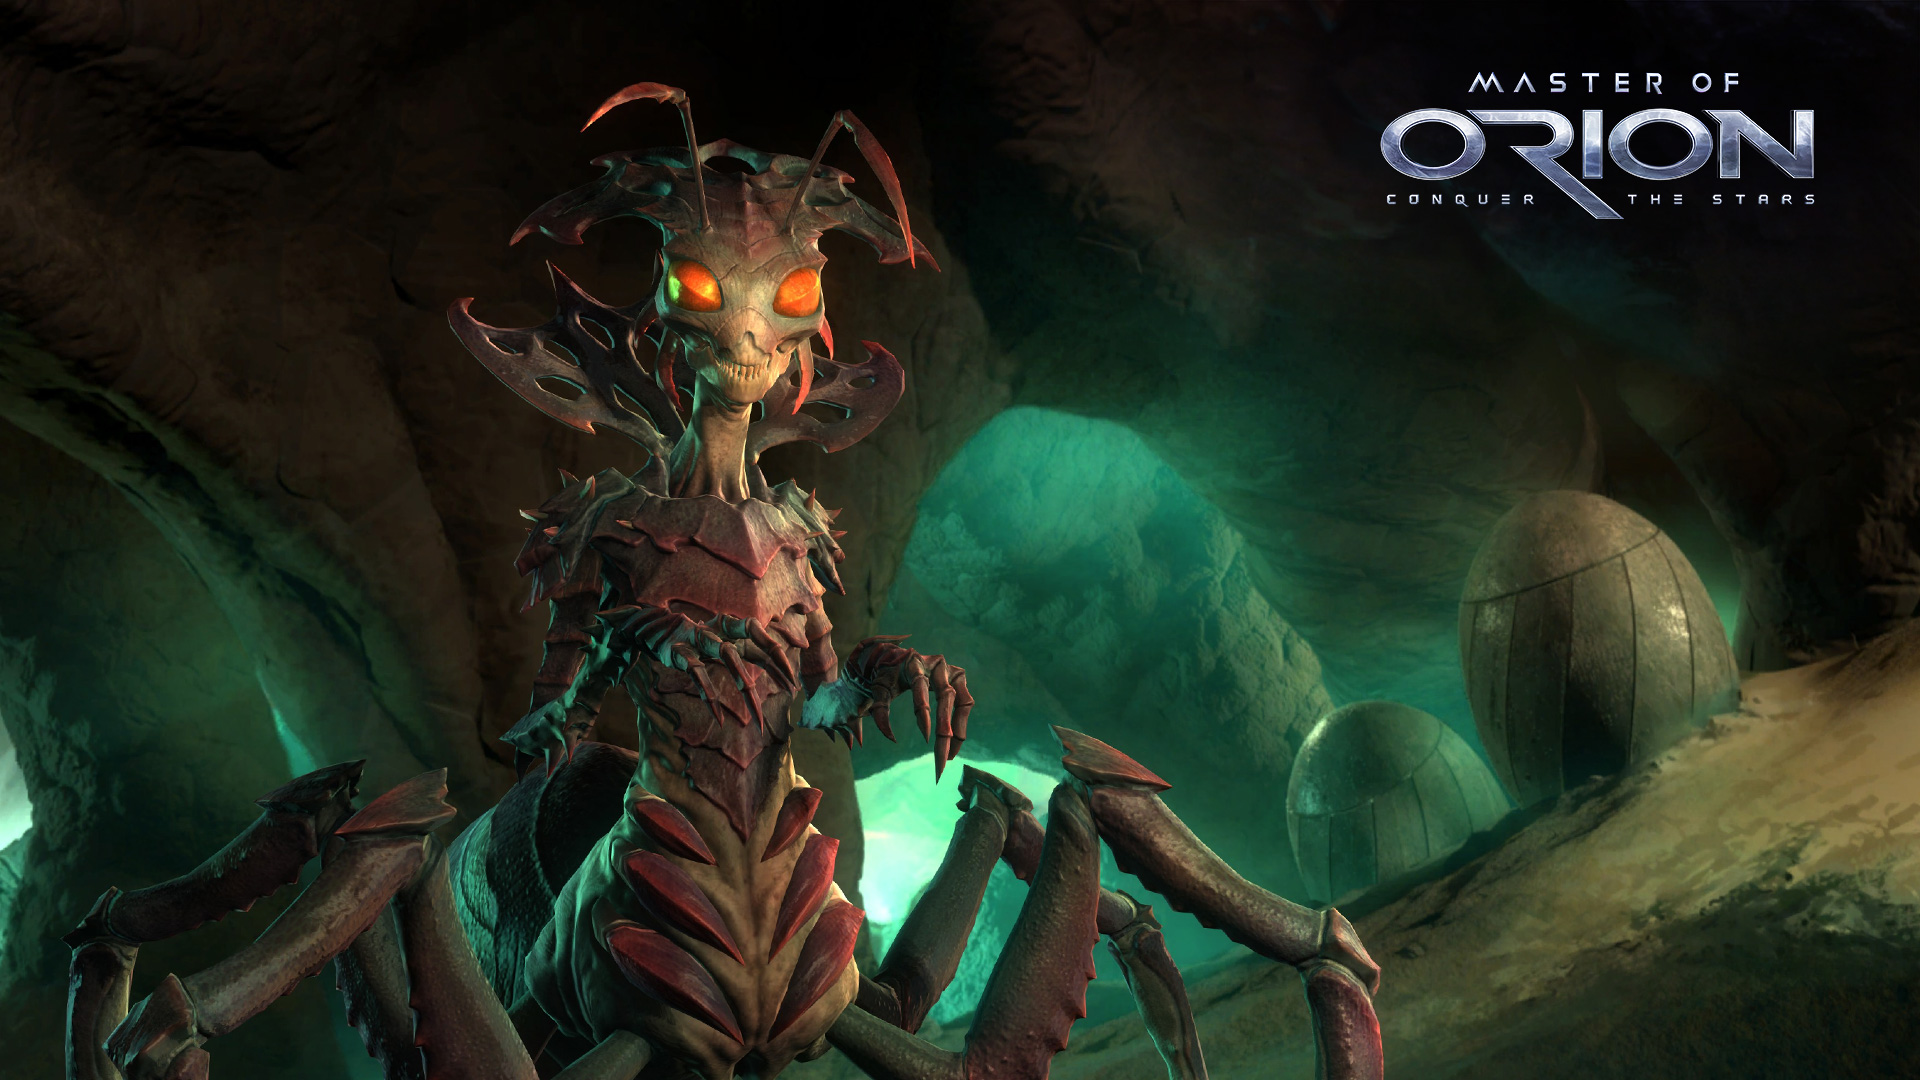 New races appeared in Master Of Orion